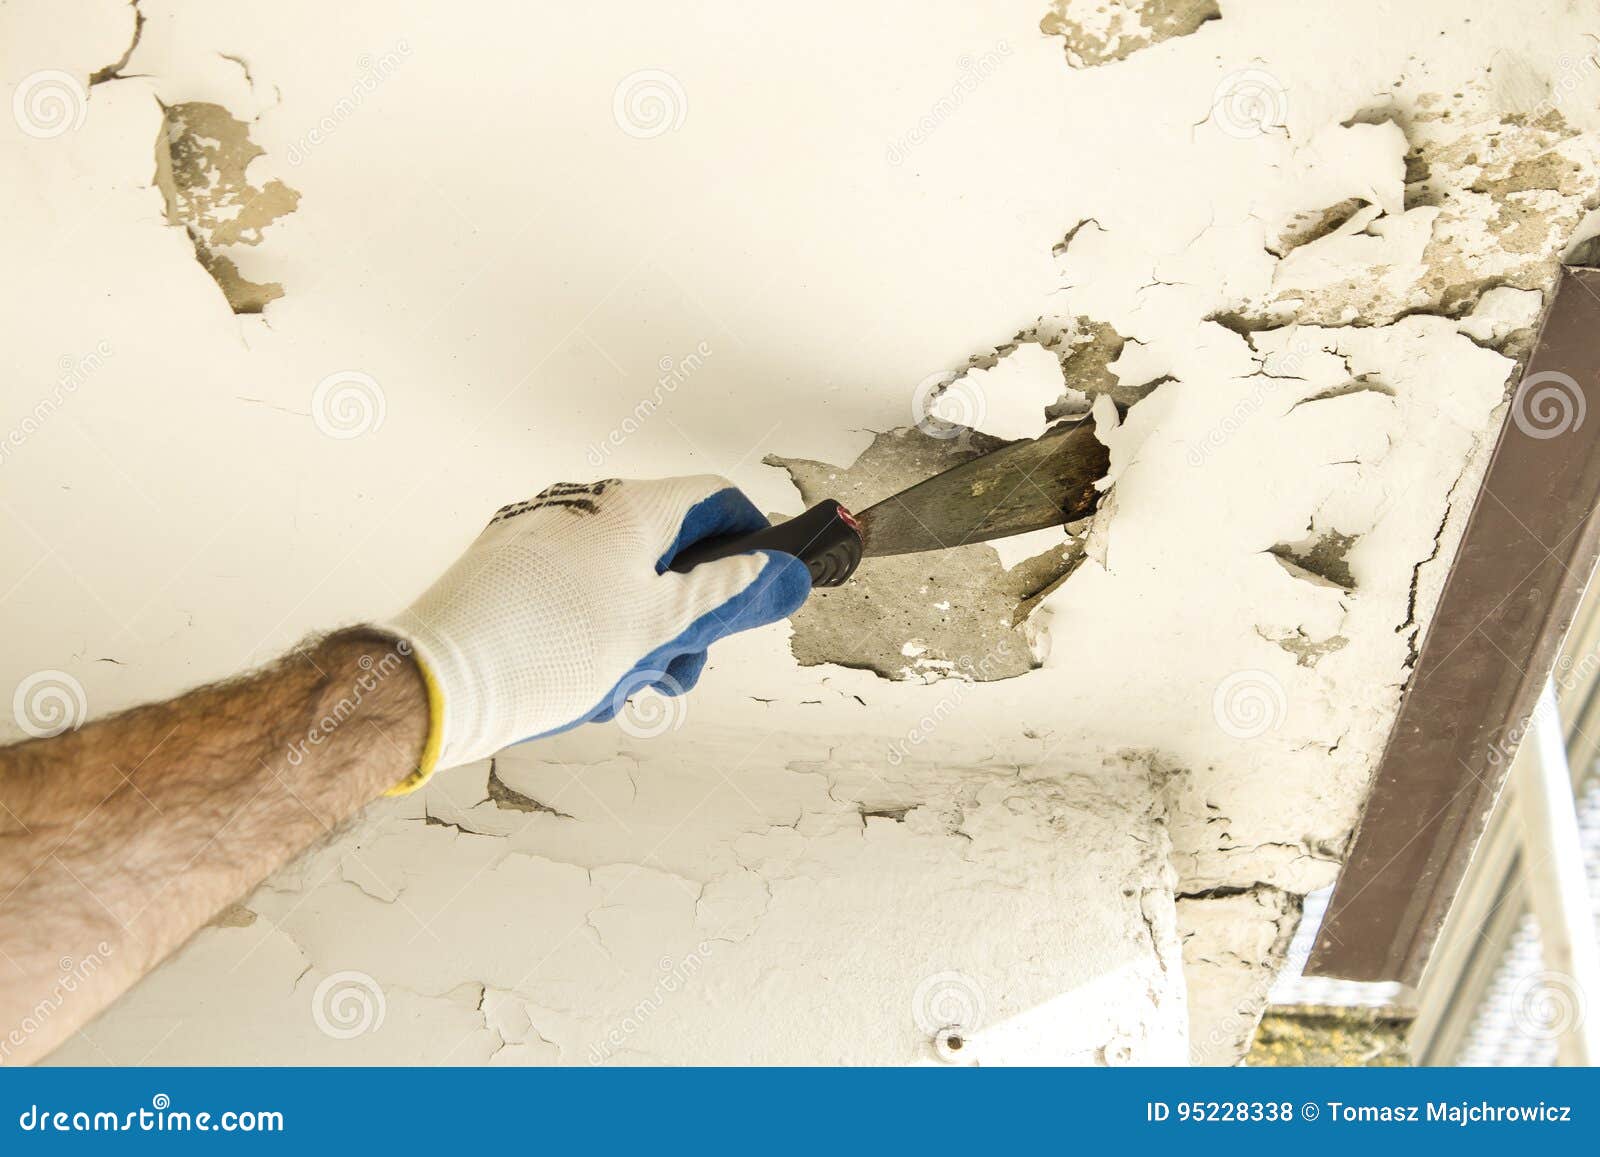 The Construction Worker S Hand In The Protective Glove Removes The